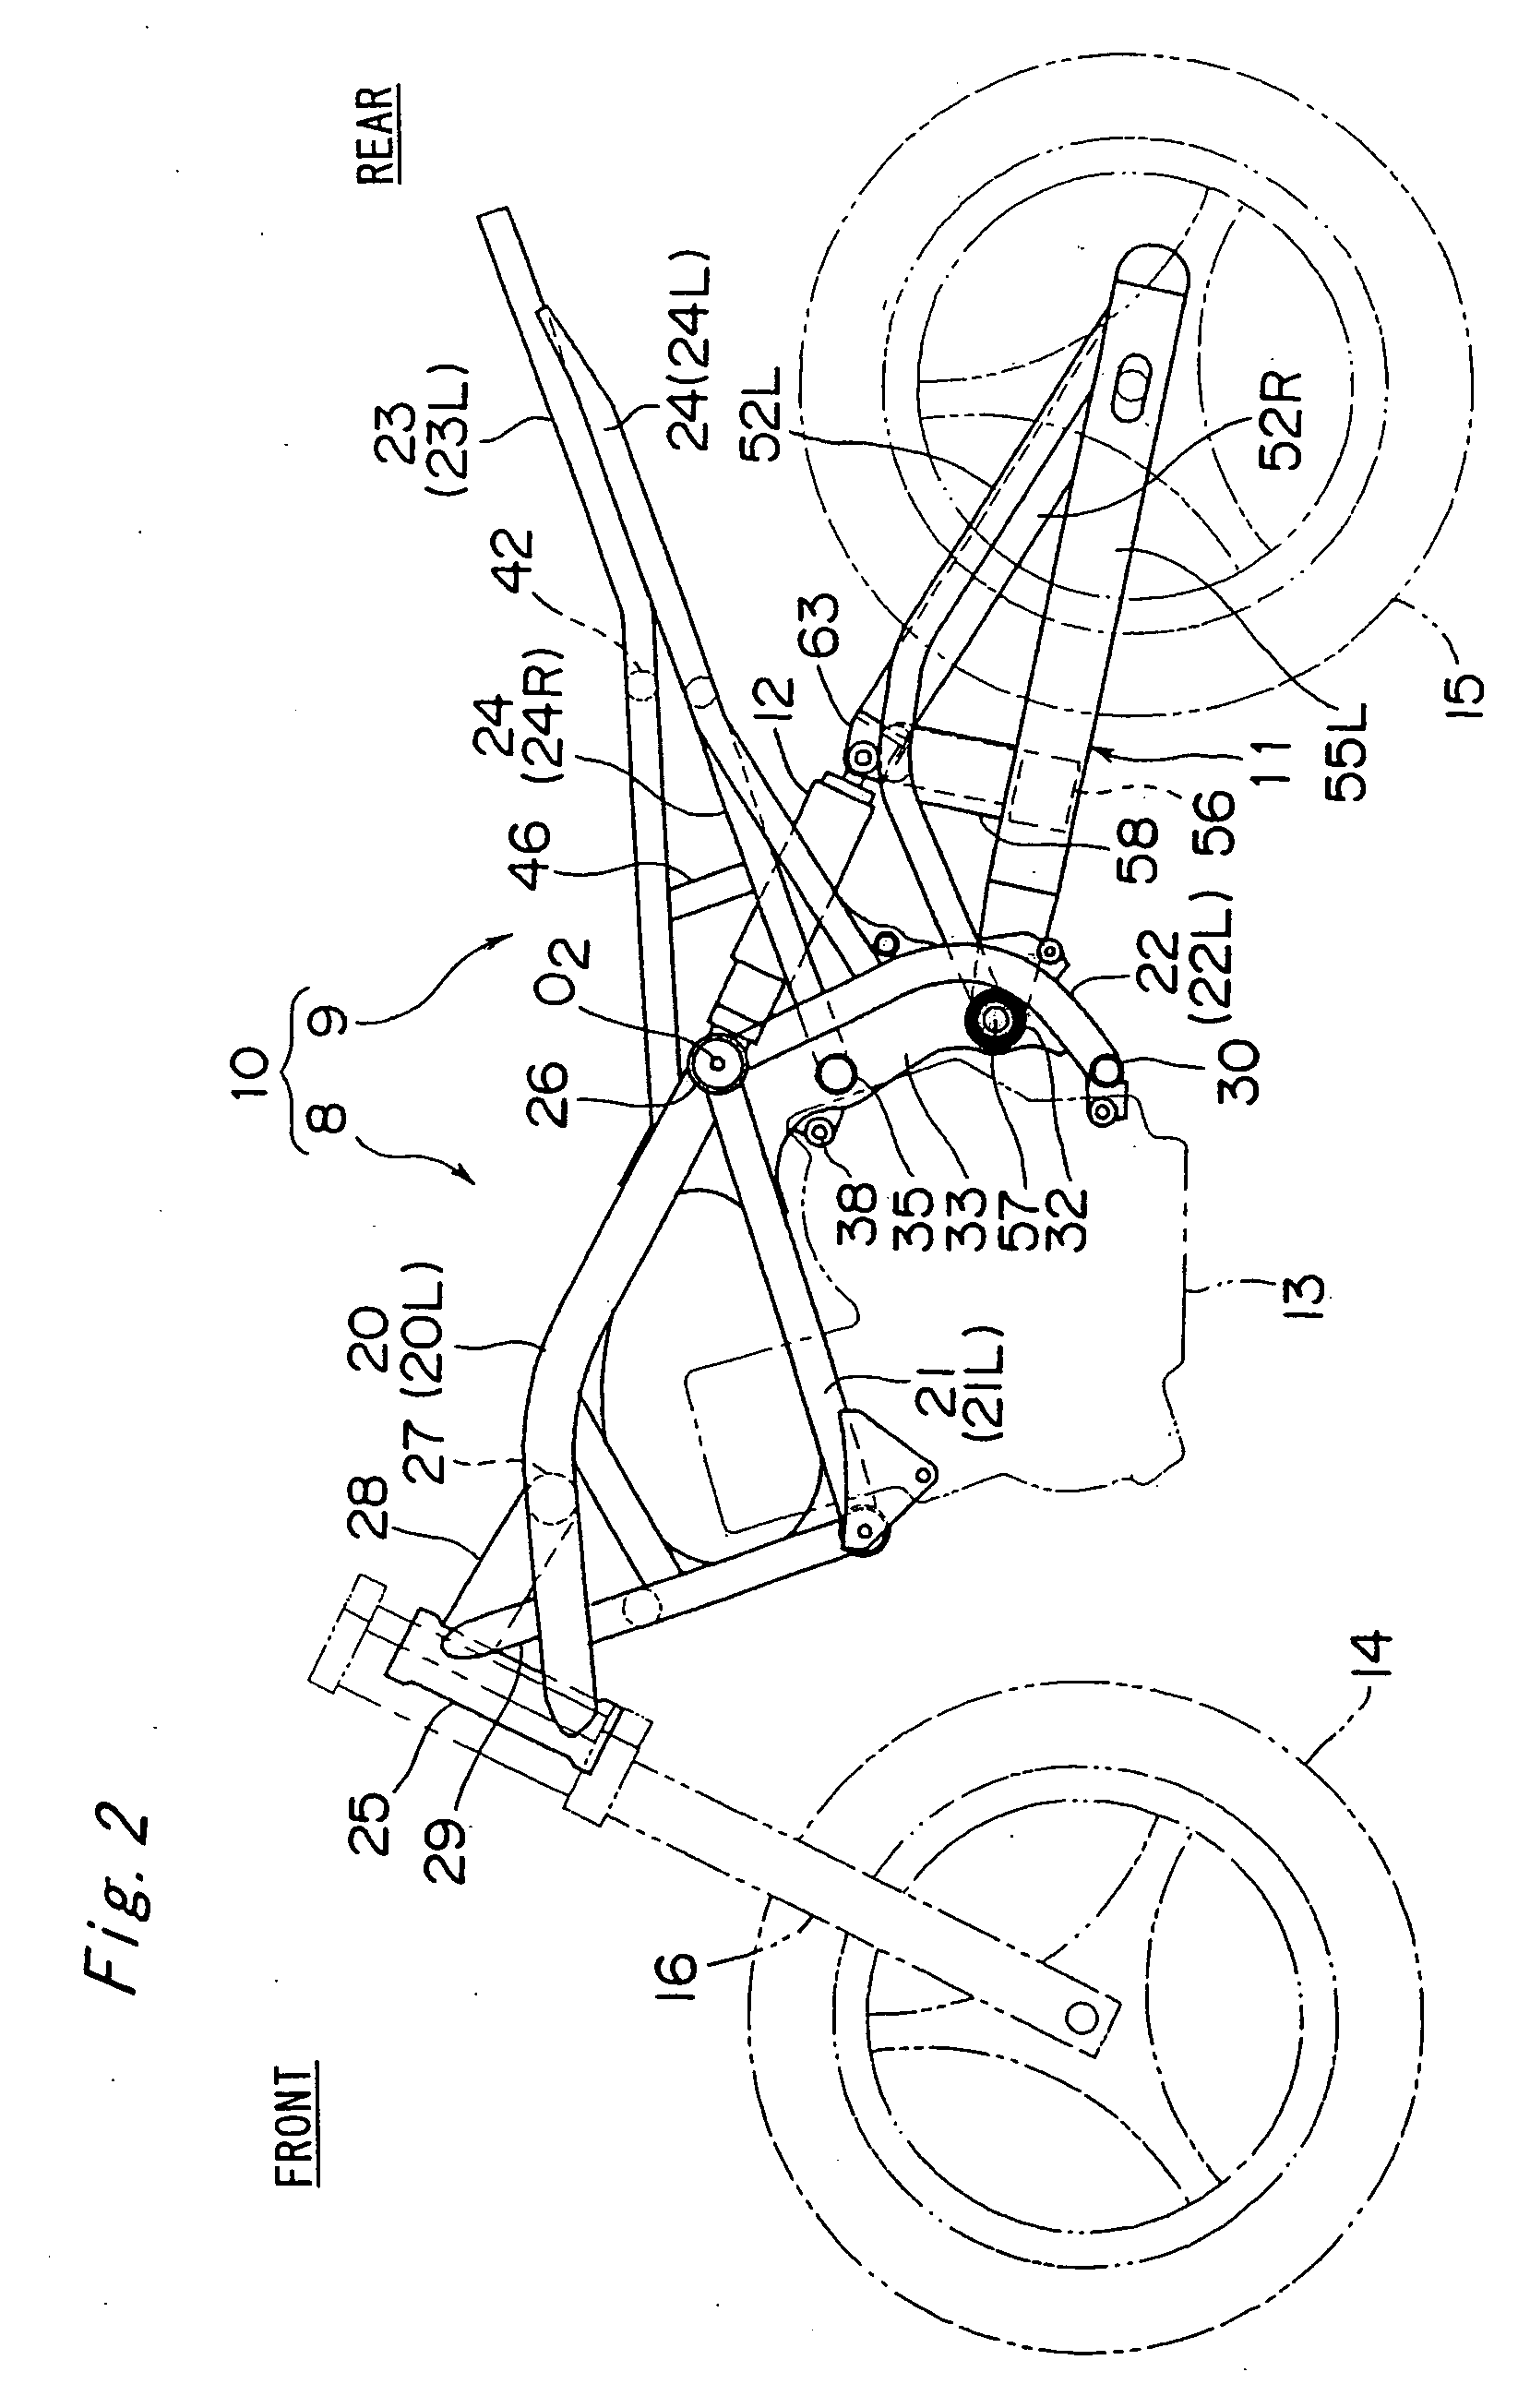 Vehicle body structure of motorcycle